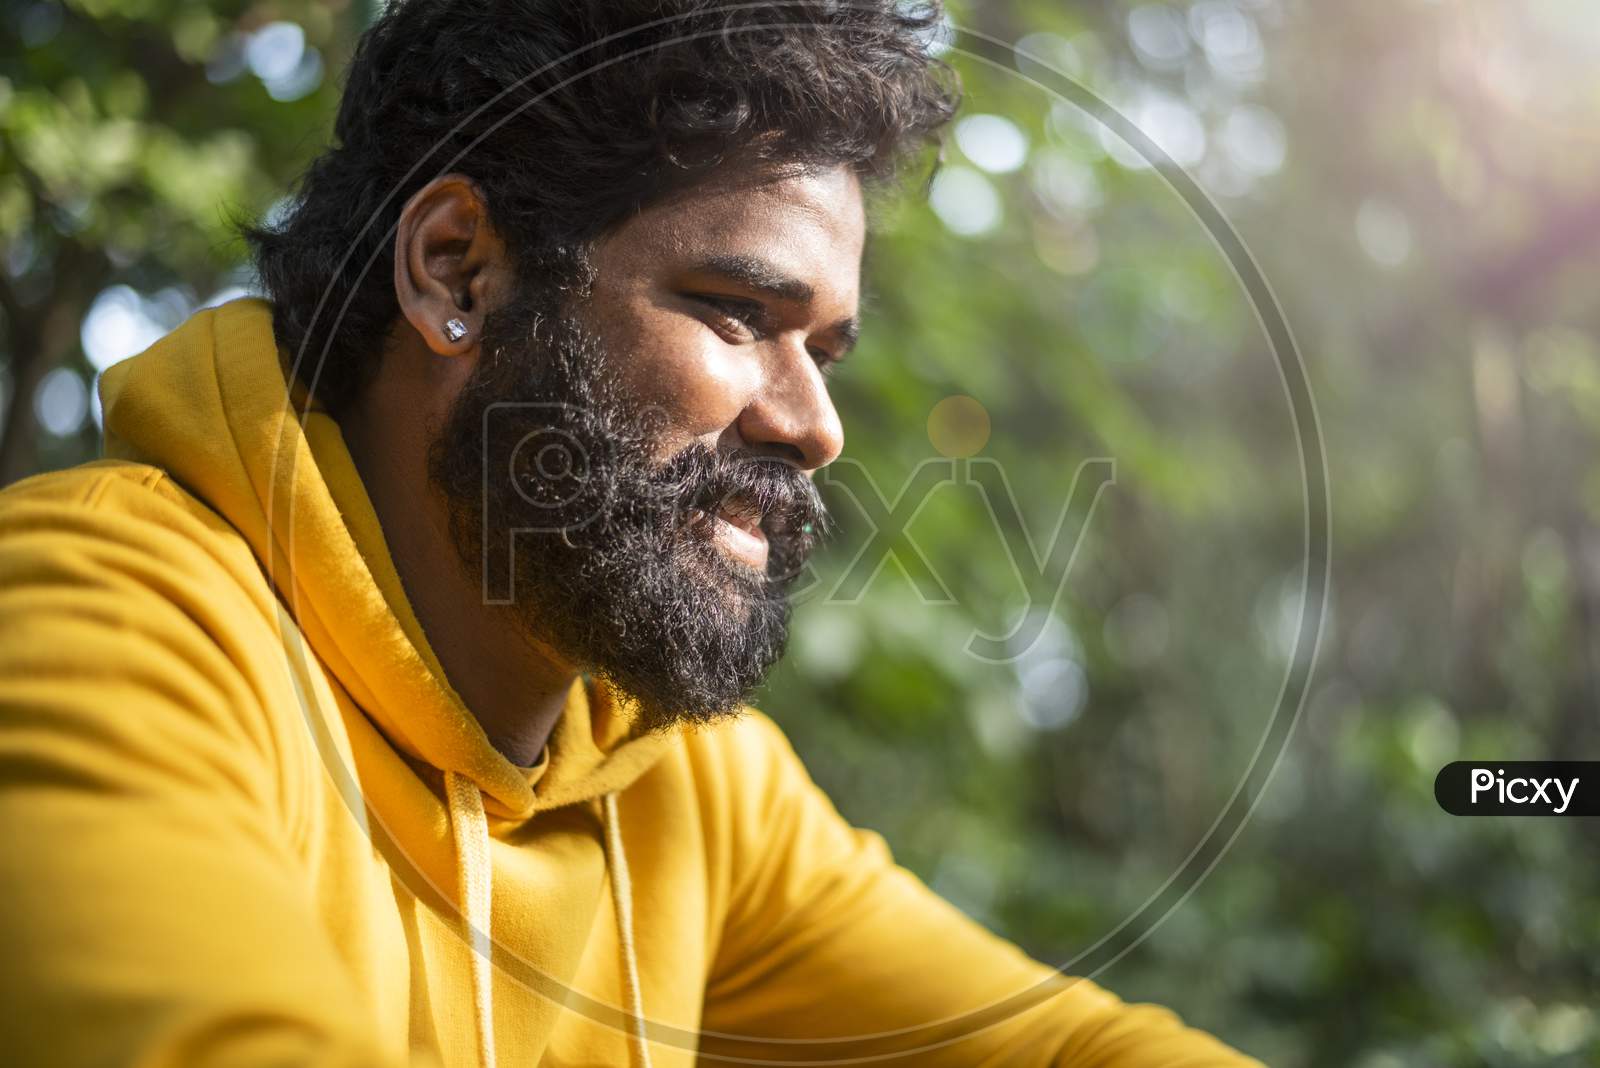 The happy smiling face of a male model, Close up photograph of an Indian male model